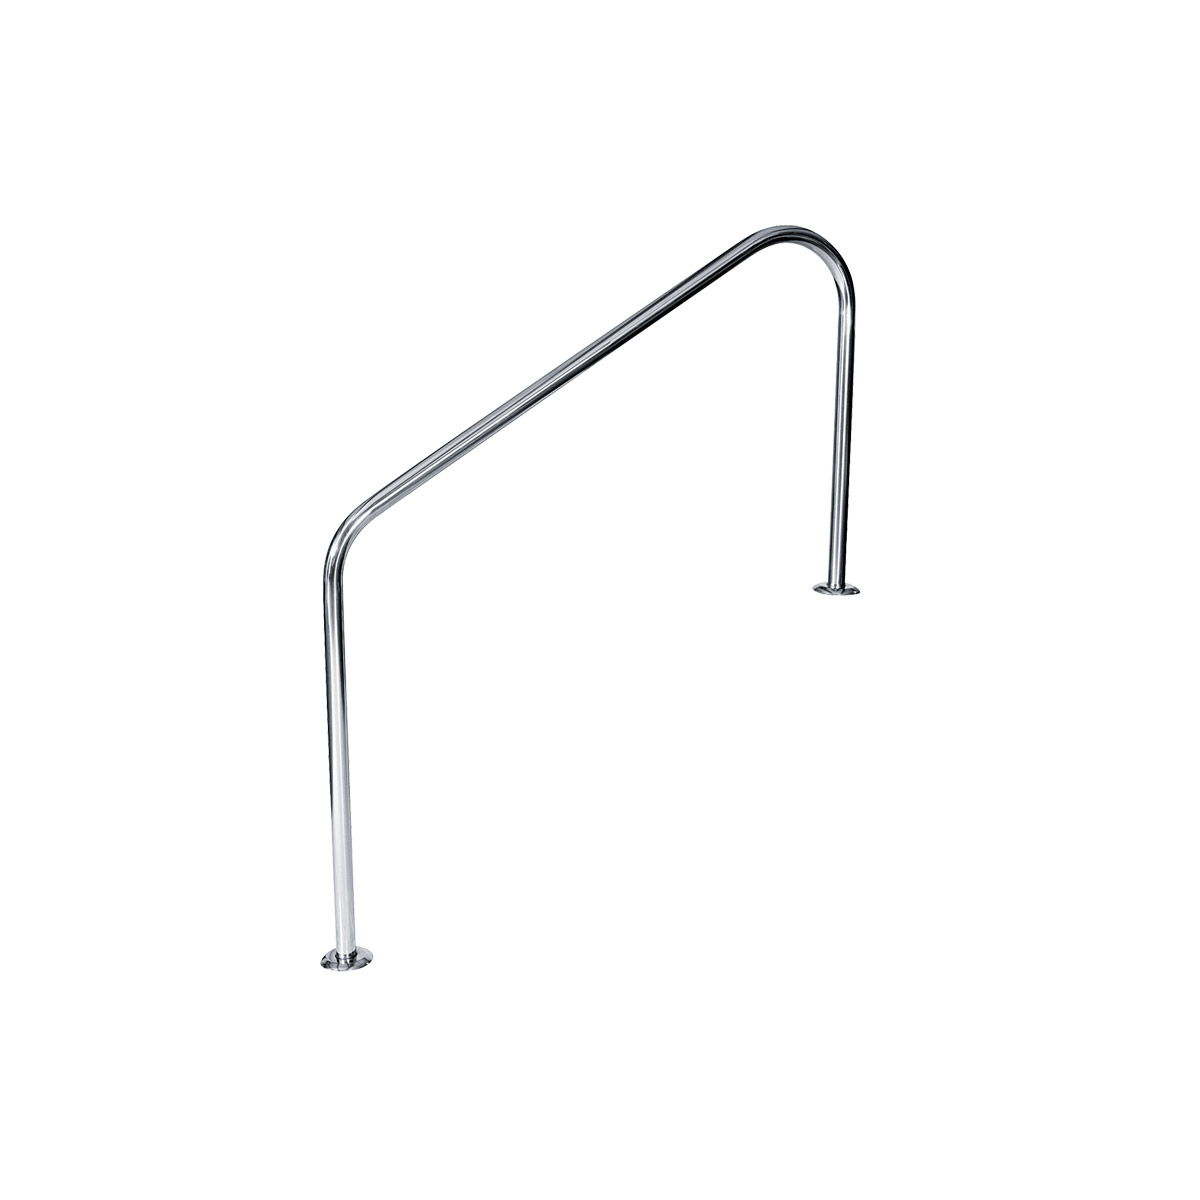 Smart handrail deluxe, 1219 mm AISI 316L Smart handrail deluxe, 1219 mm AISI 316L